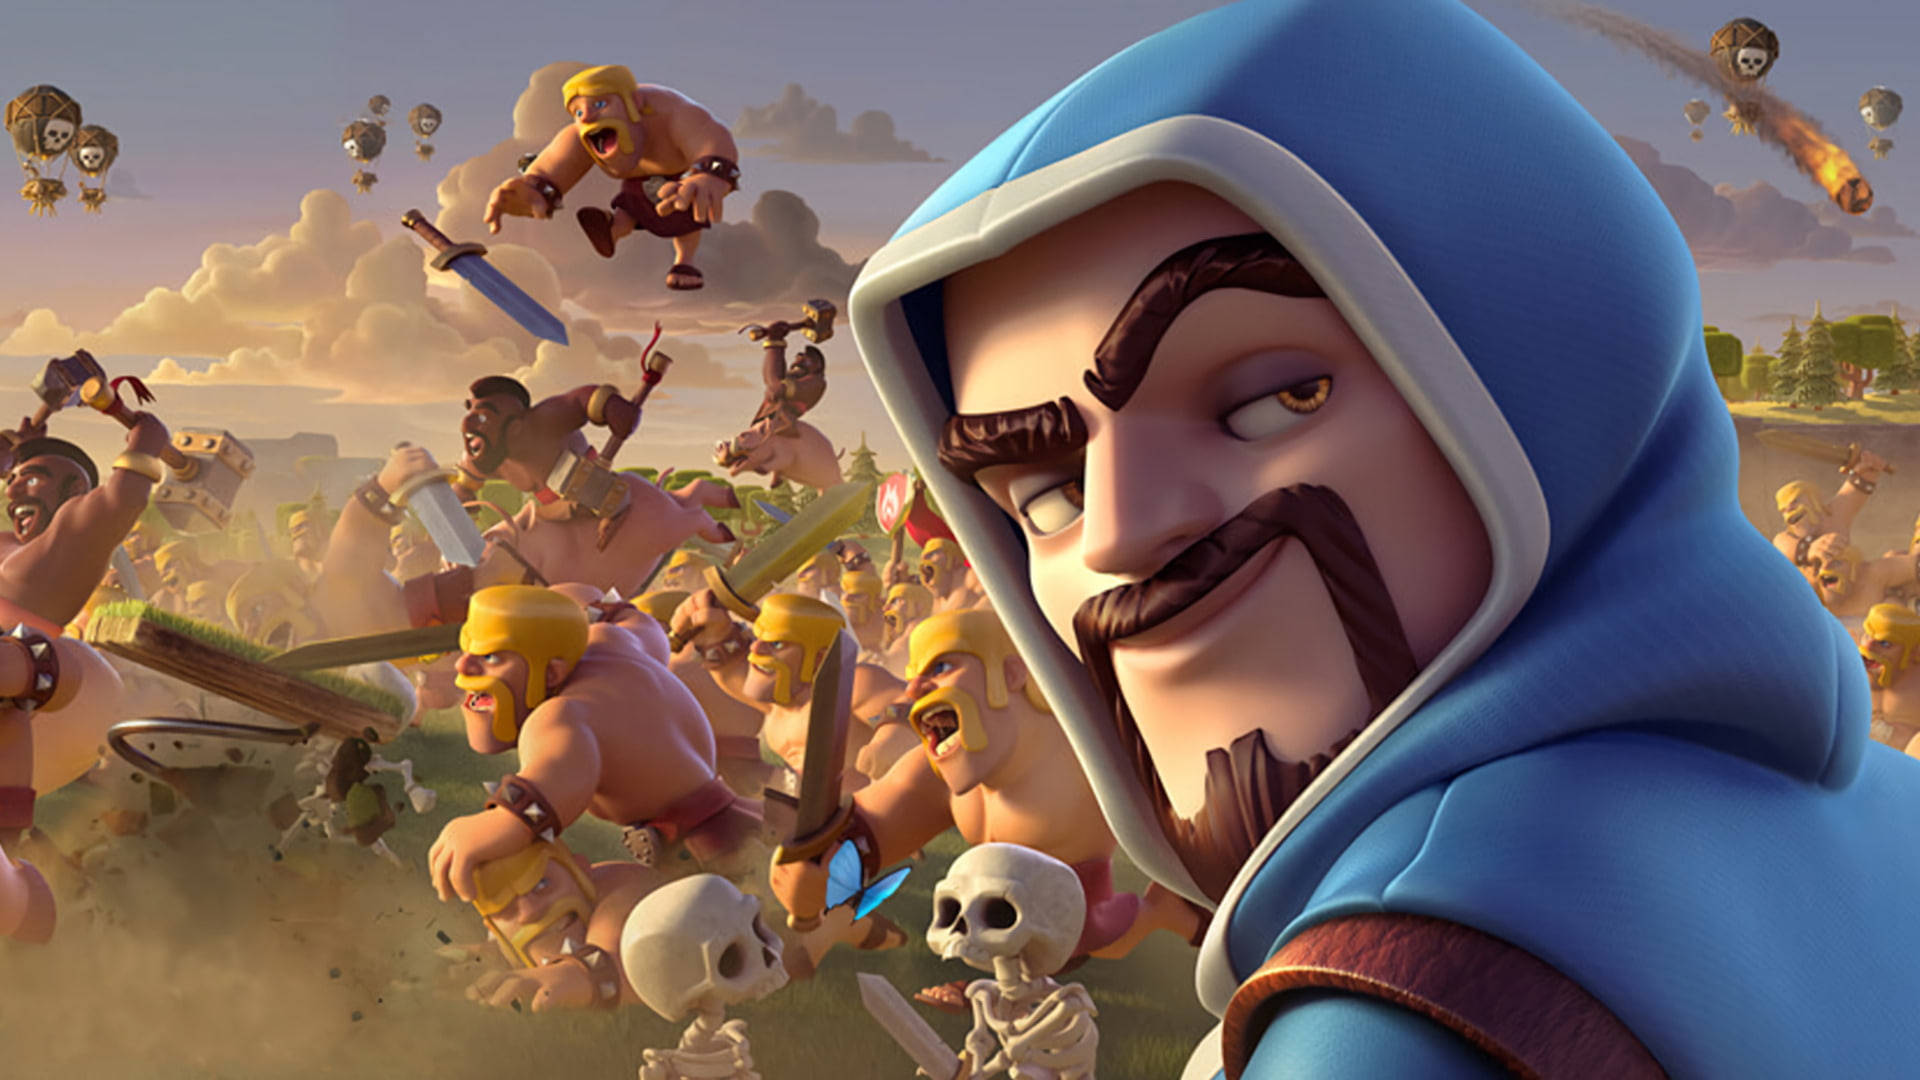 Download Clash Of Clans The Wizard Wallpaper 